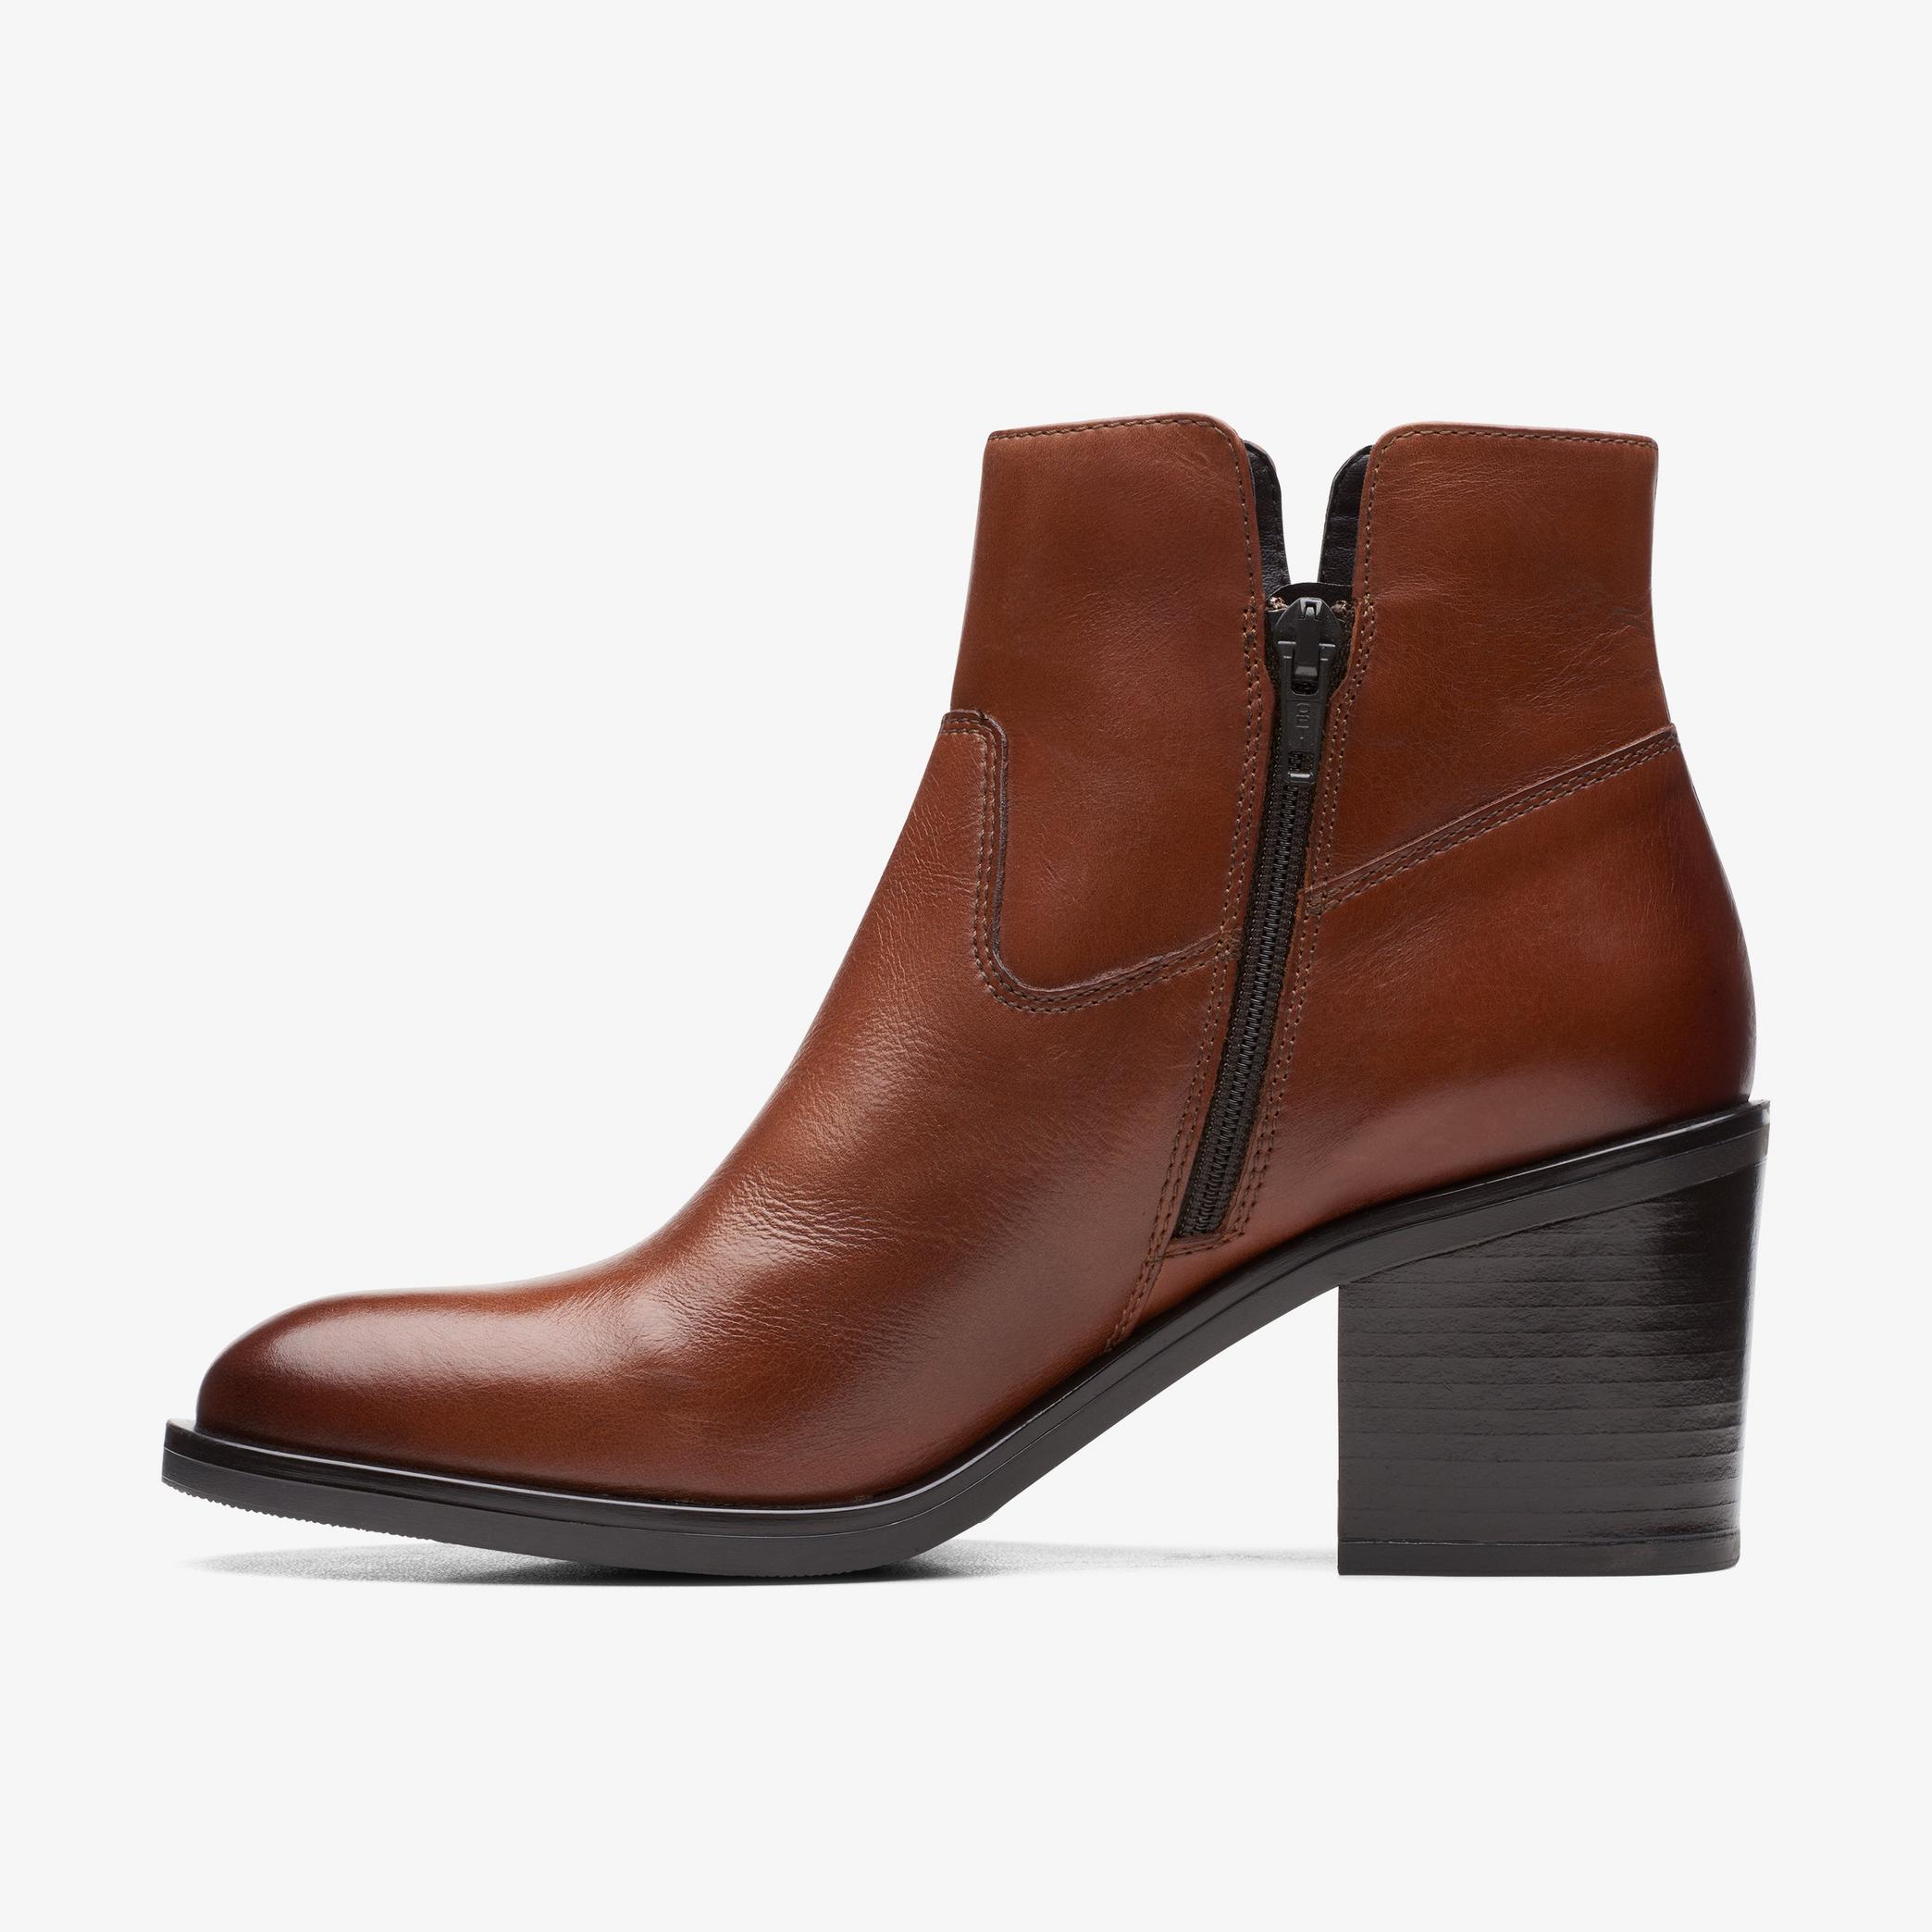 Valvestino Lo Dark Tan Leather Ankle Boots, view 3 of 7